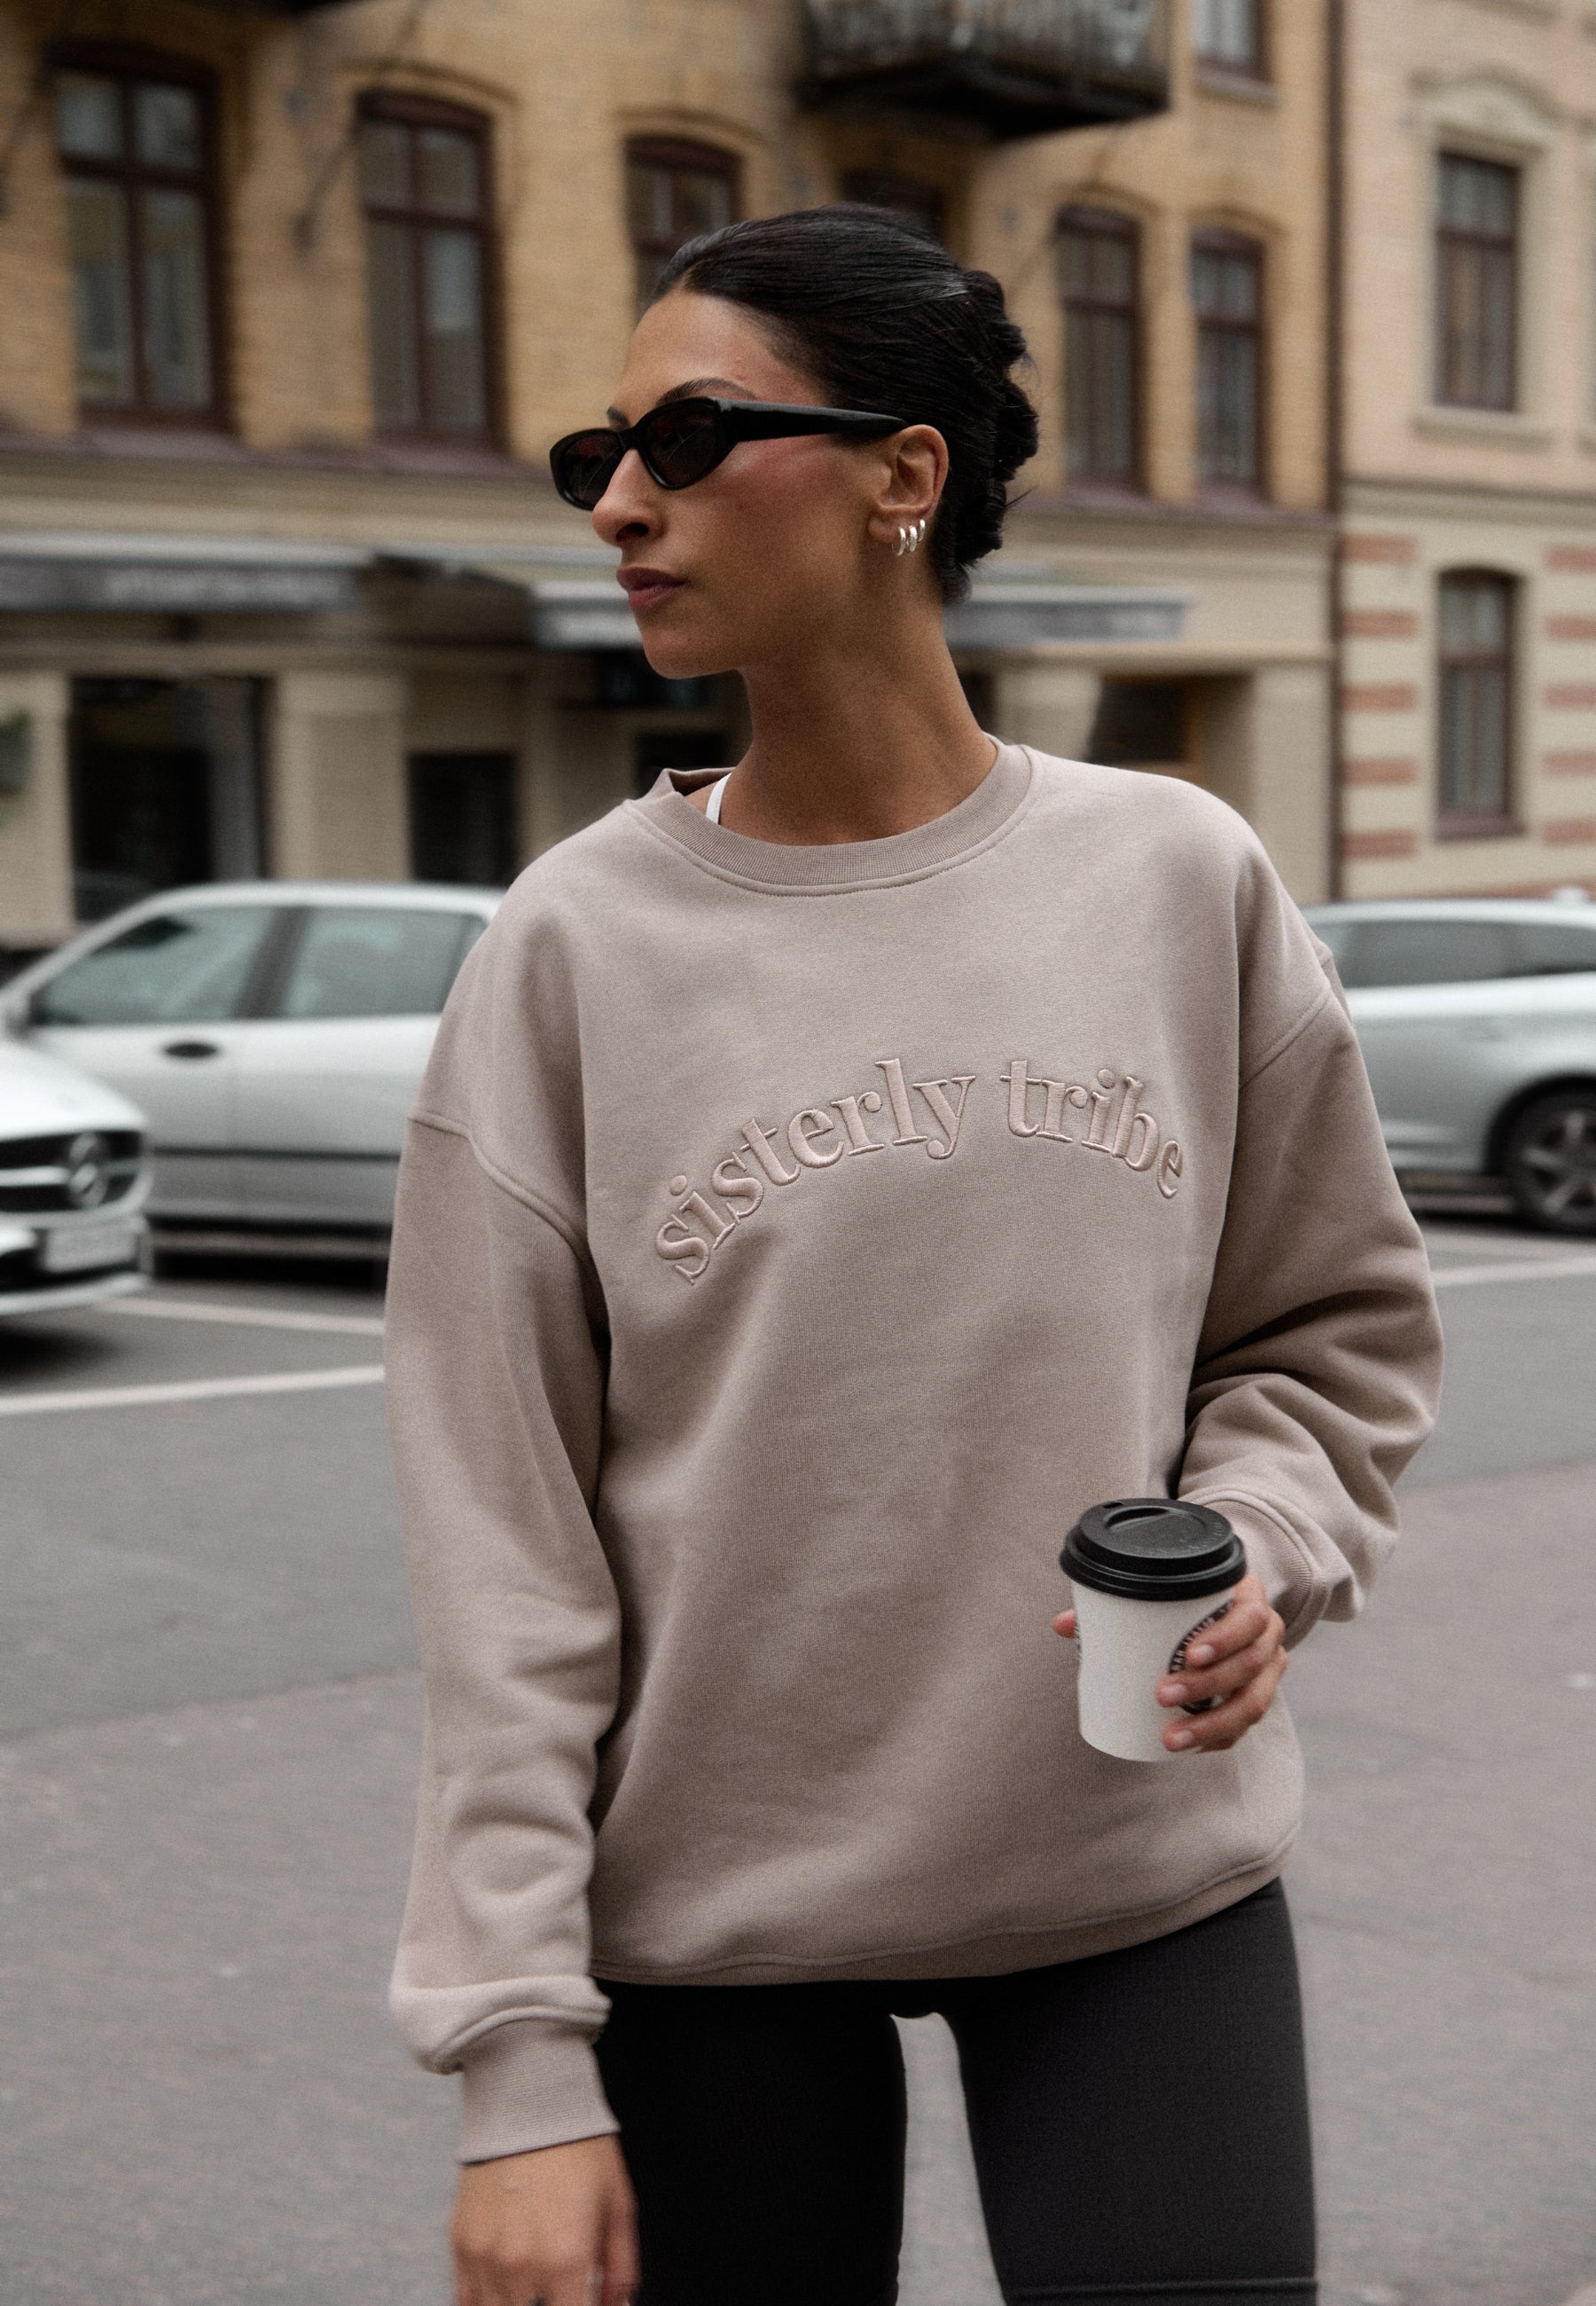 sisterly tribe sweatshirts in cappuccino oversized sweat made from recycled cotton and organic cotton made in portugal